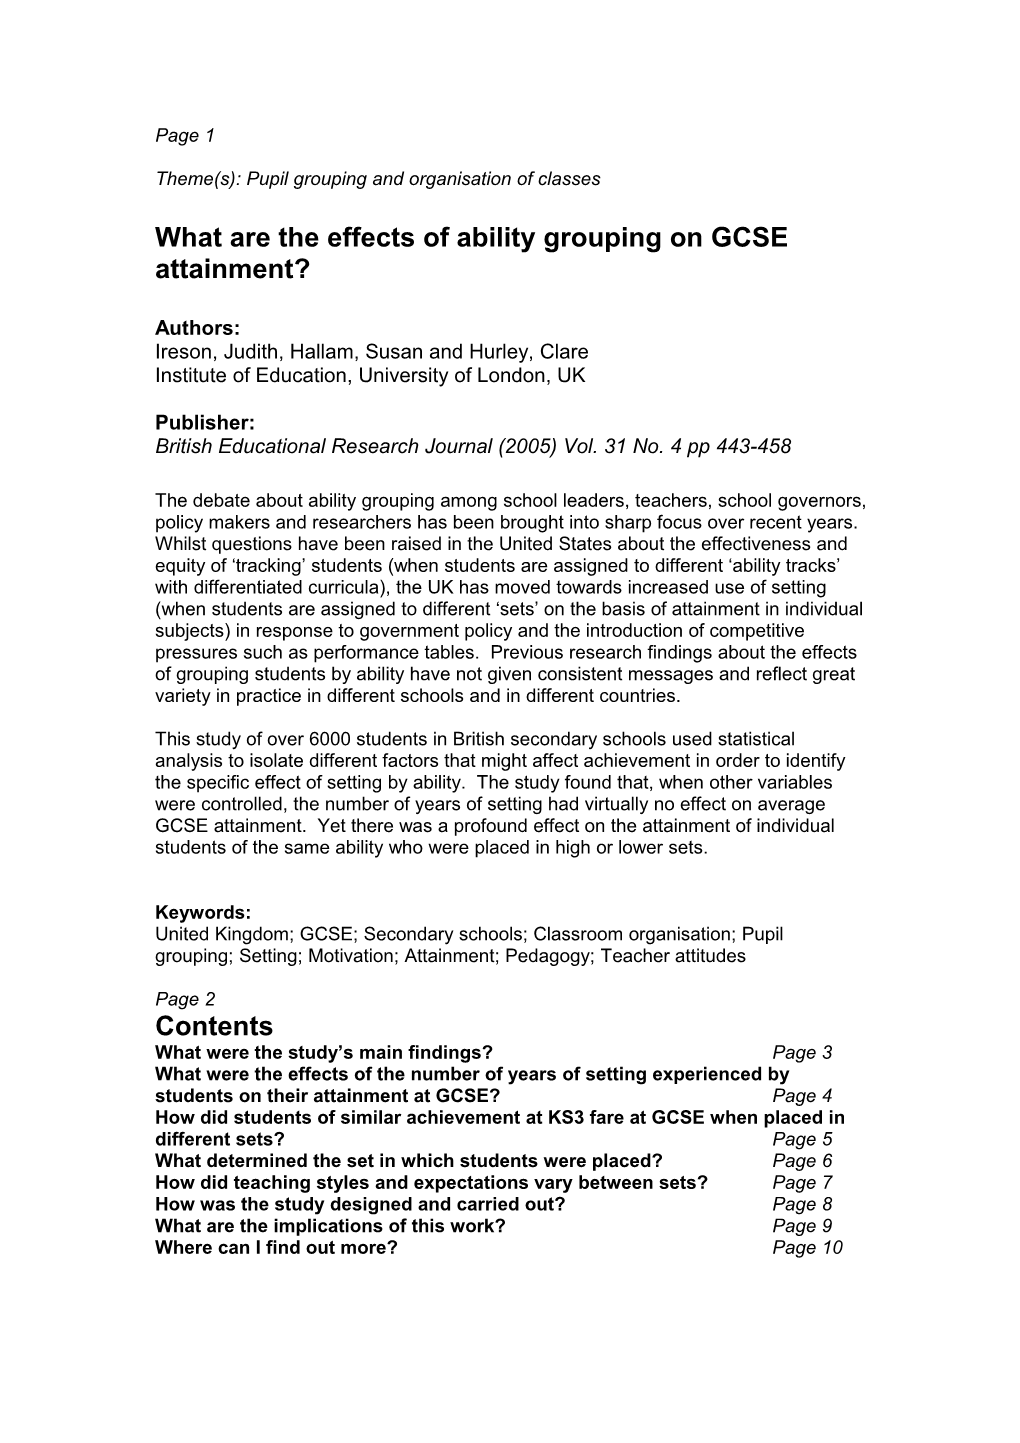 What Are the Effects of Ability Grouping on GCSE Attainment?